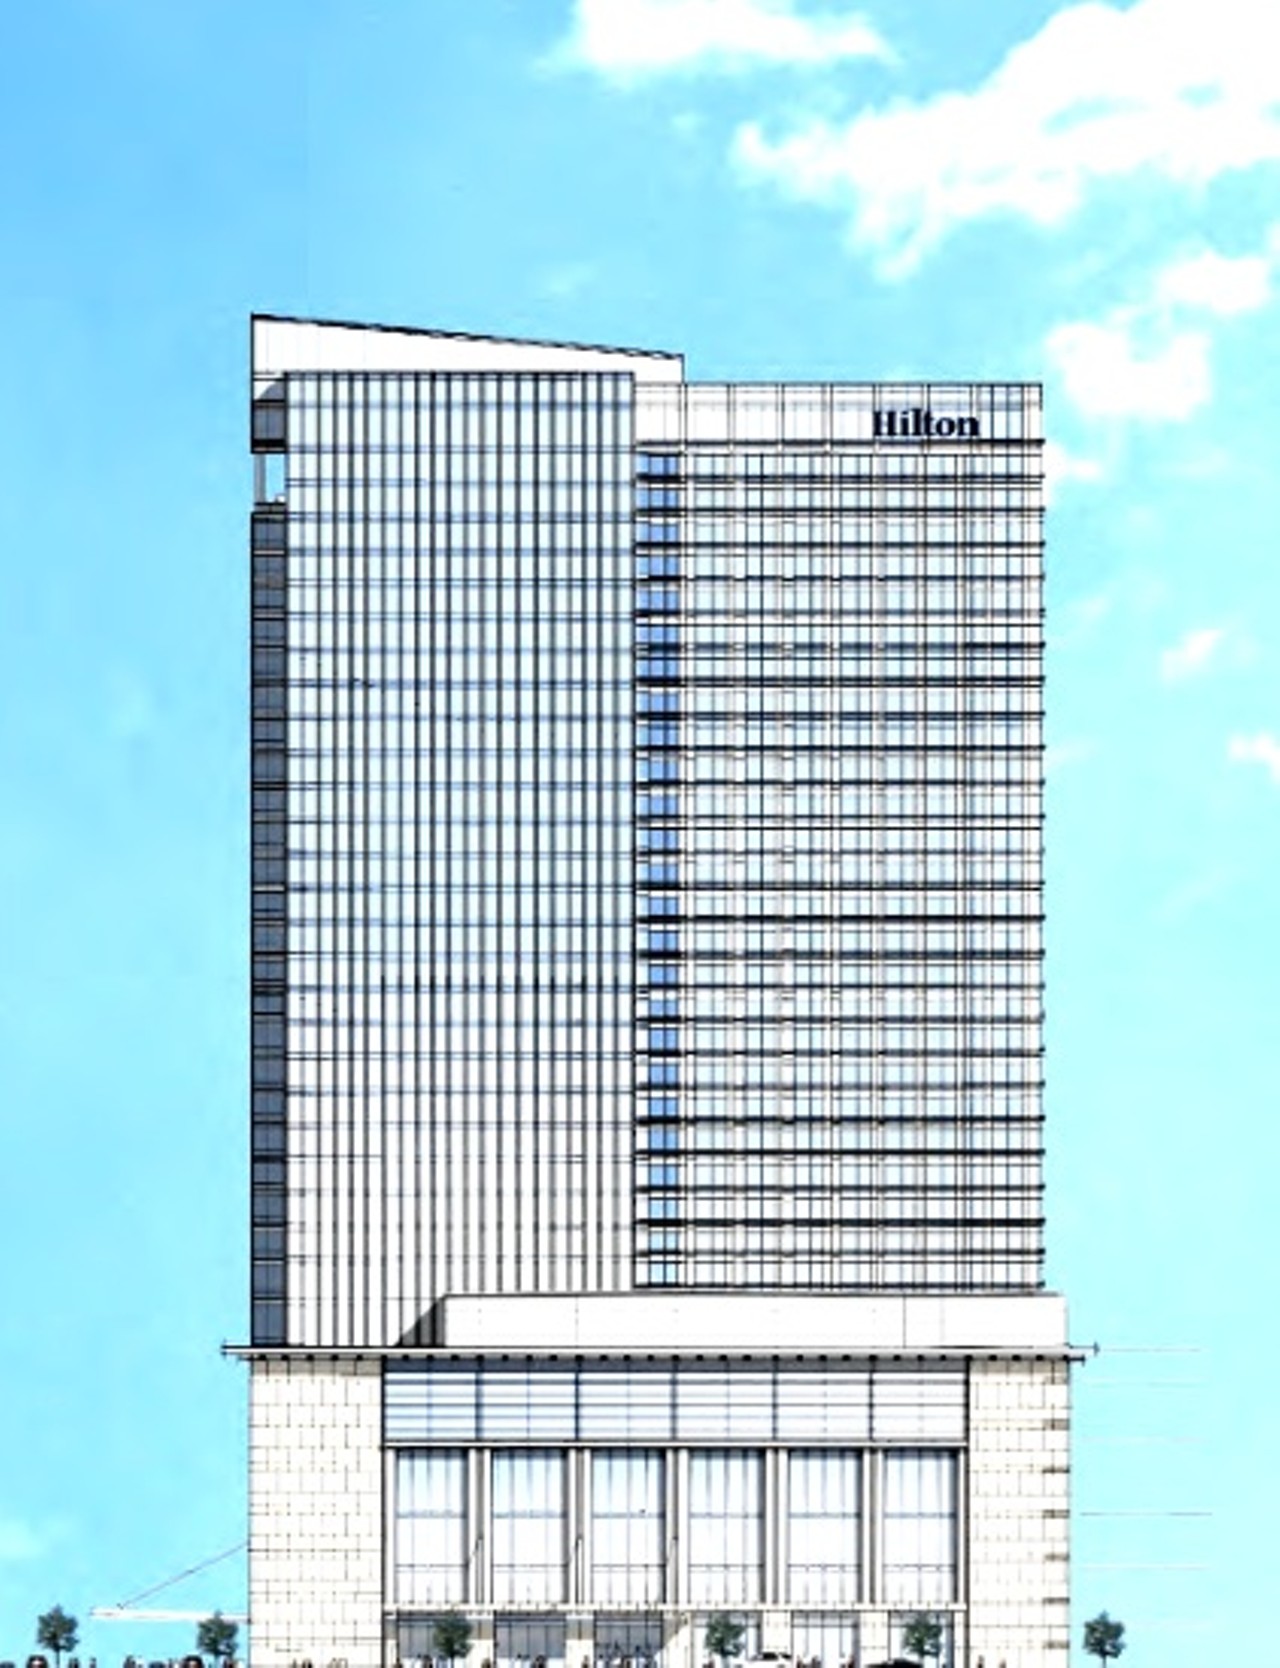 This is how the hotel will look, facing Ontario Avenue.